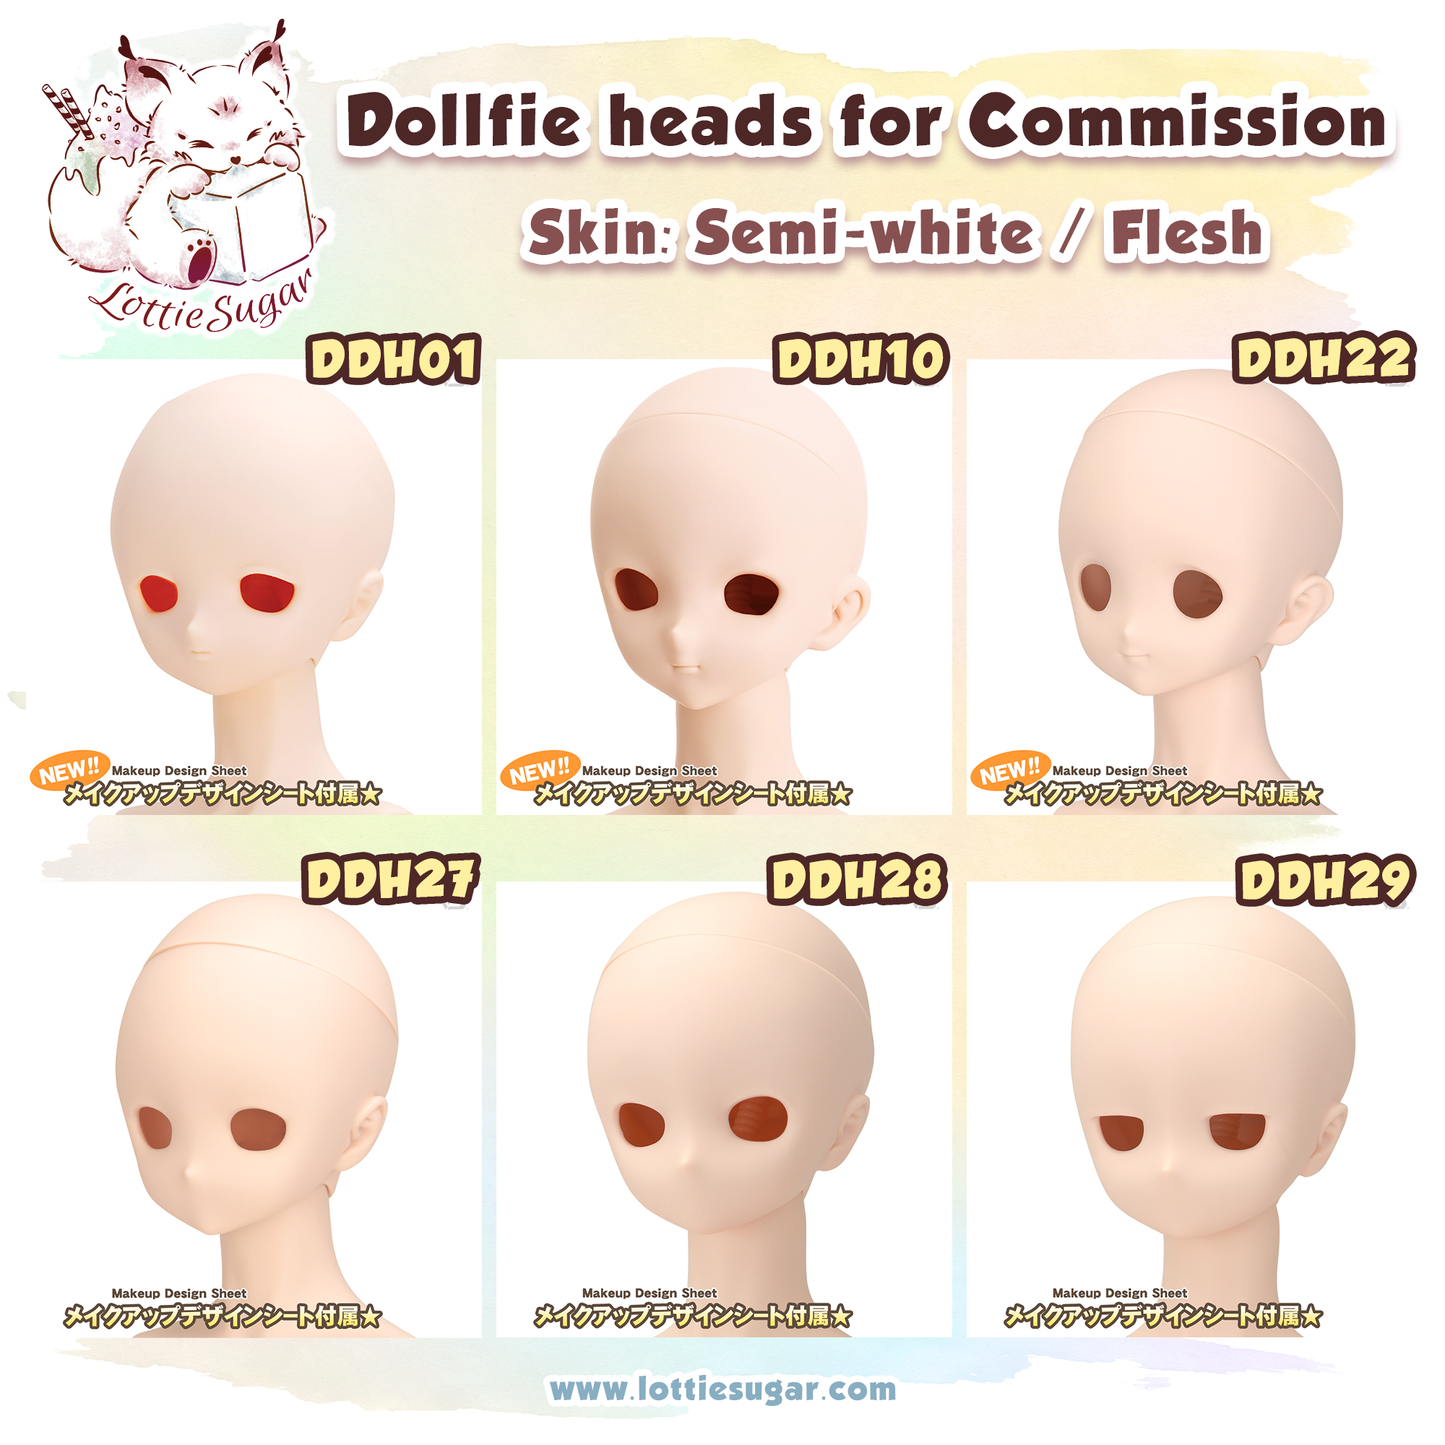 About Face-up Commission